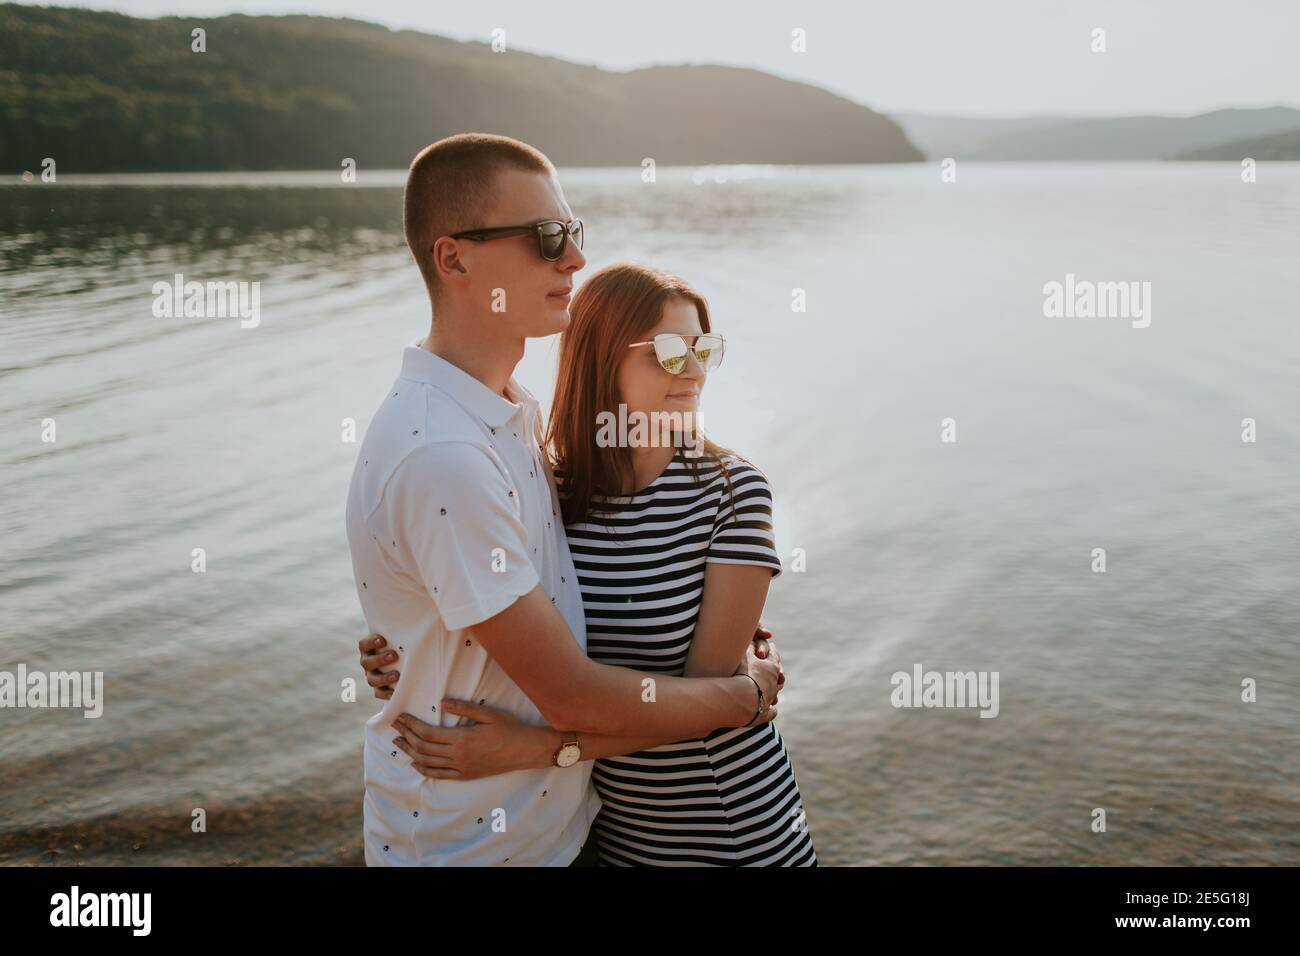 Couple in love hugging at the lake at sunset. Portrait of smiling boyfriend and girlfriend embracing on the beach on warm summer evening. Stock Photo